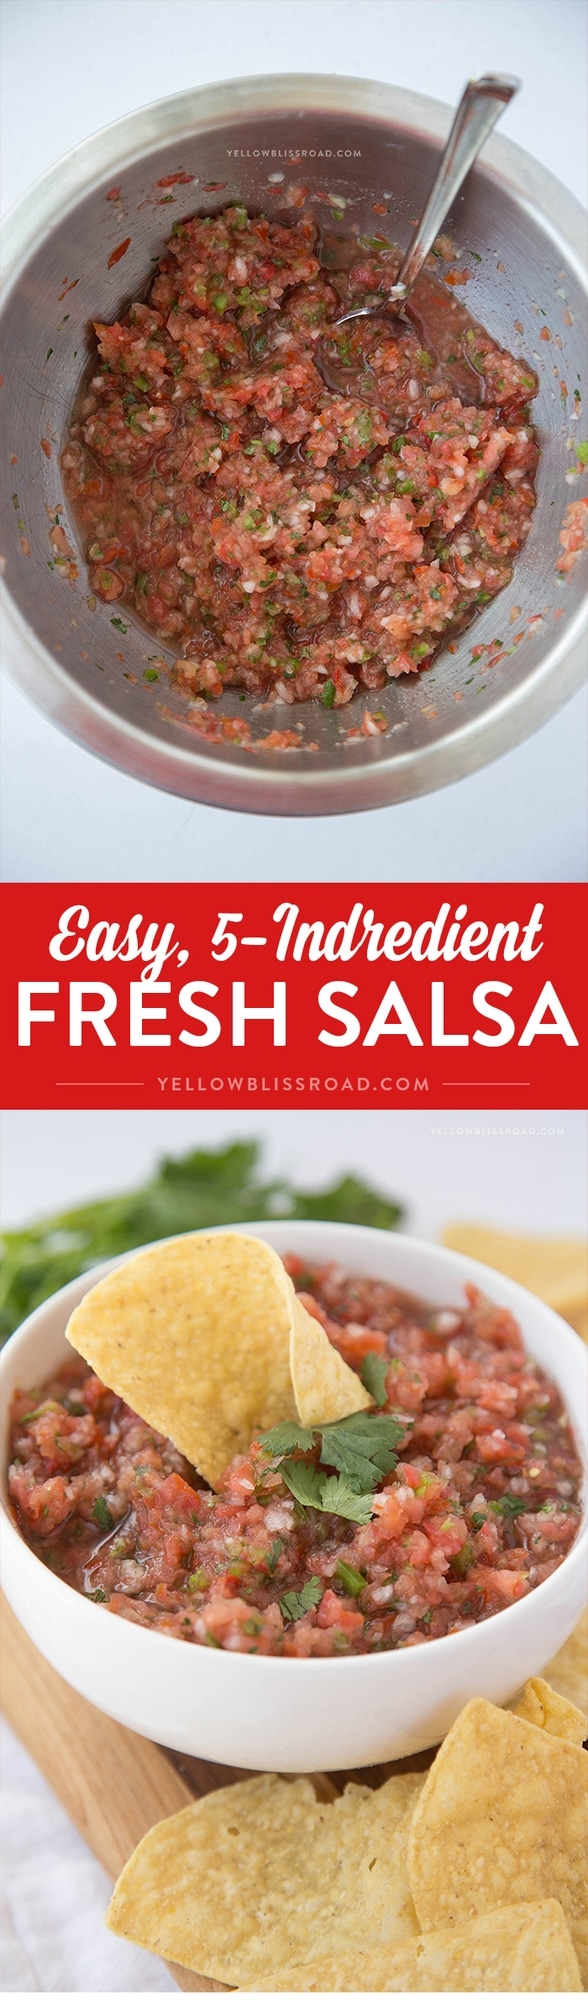 Easy Fresh Salsa - Just 5 ingredients to delicious, fresh salsa at home!